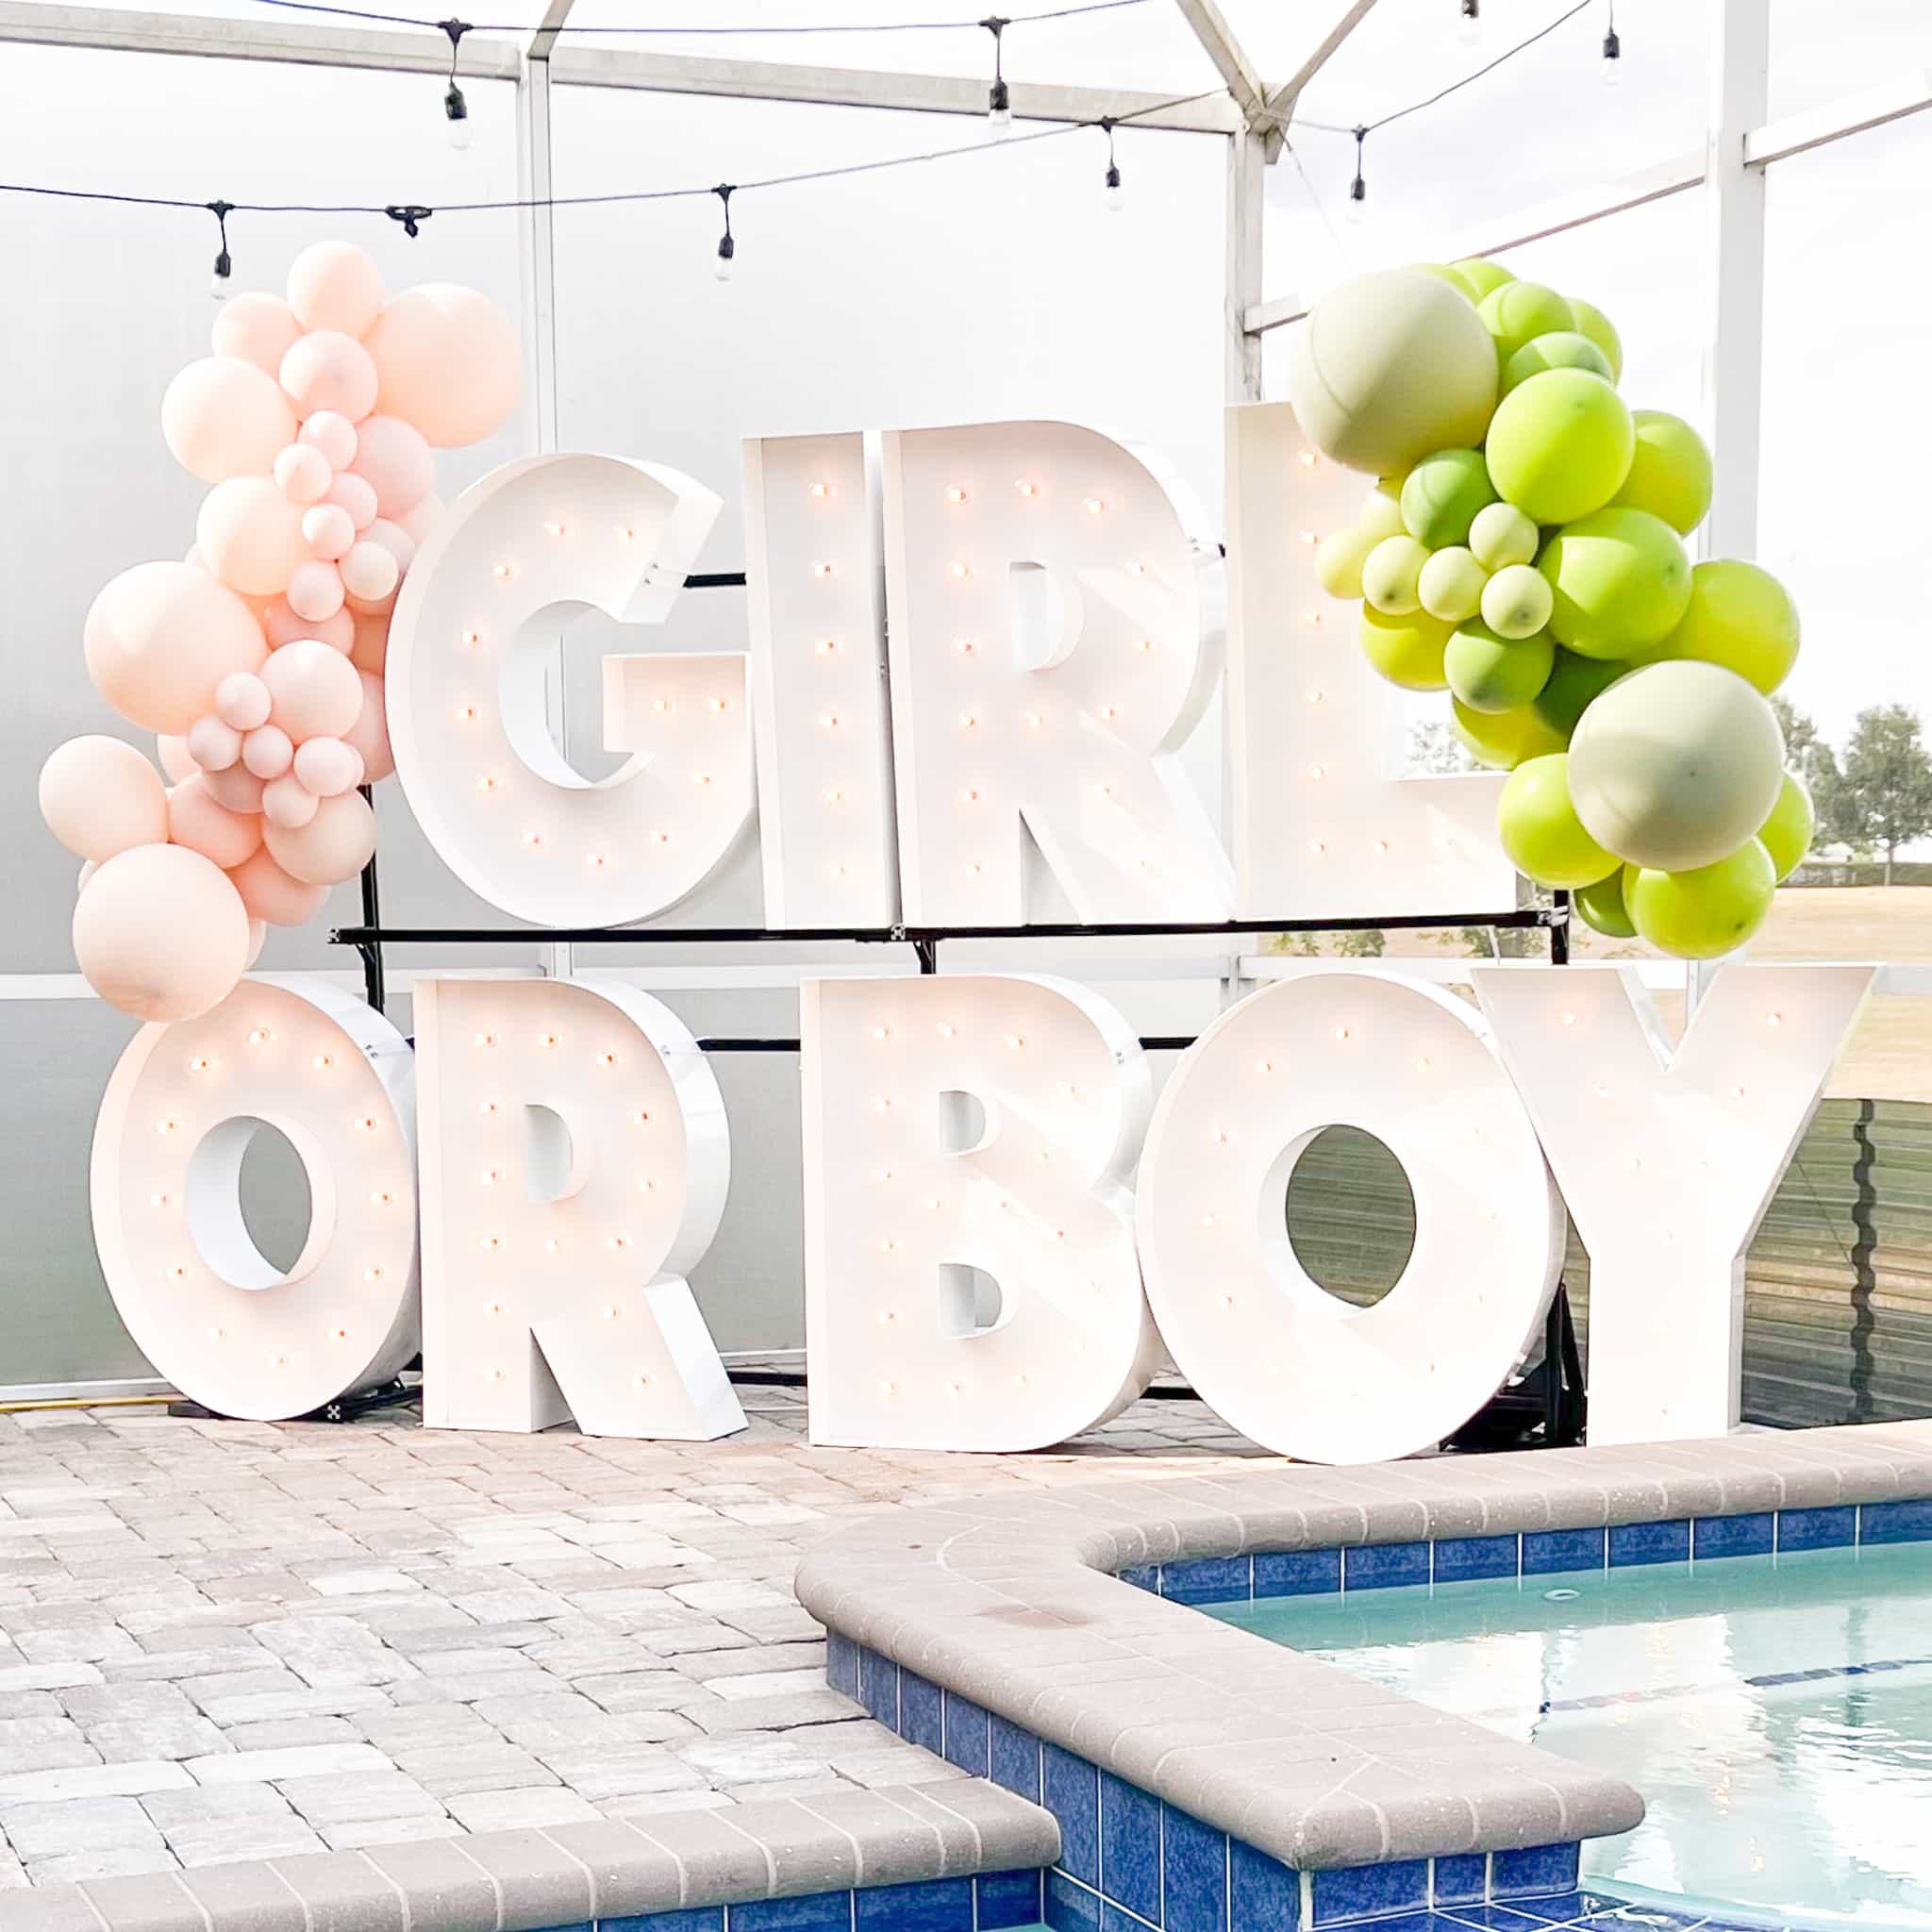 Marquee letter display in a backyard that reads "GIRL OR BOY" with orange and green balloons